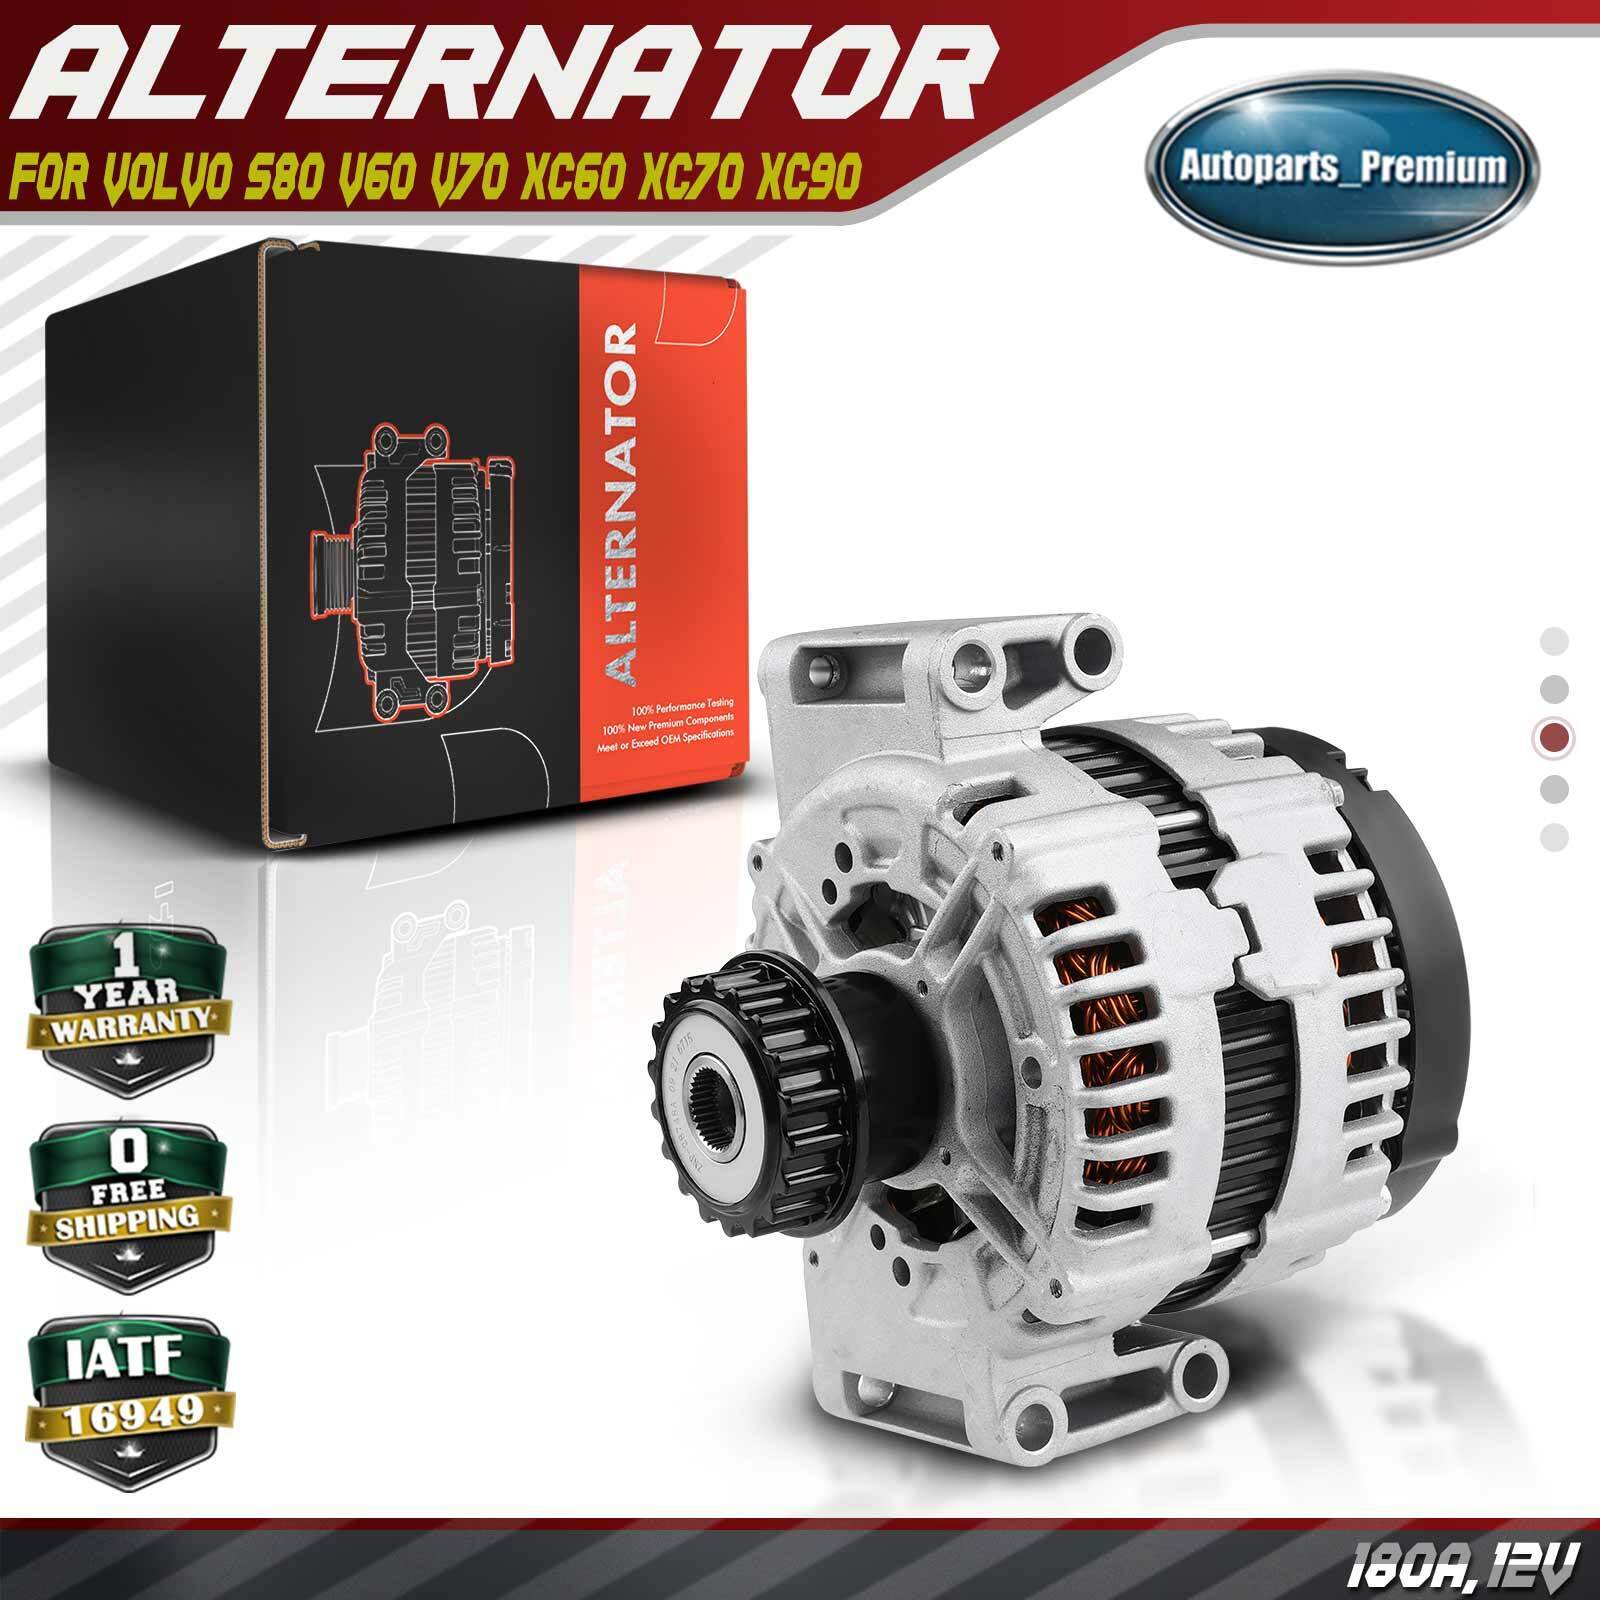 Alternator for Volvo S80 V60 V70 XC60 XC70 XC90 180A 12V CCW w/ Decoupler Pulley